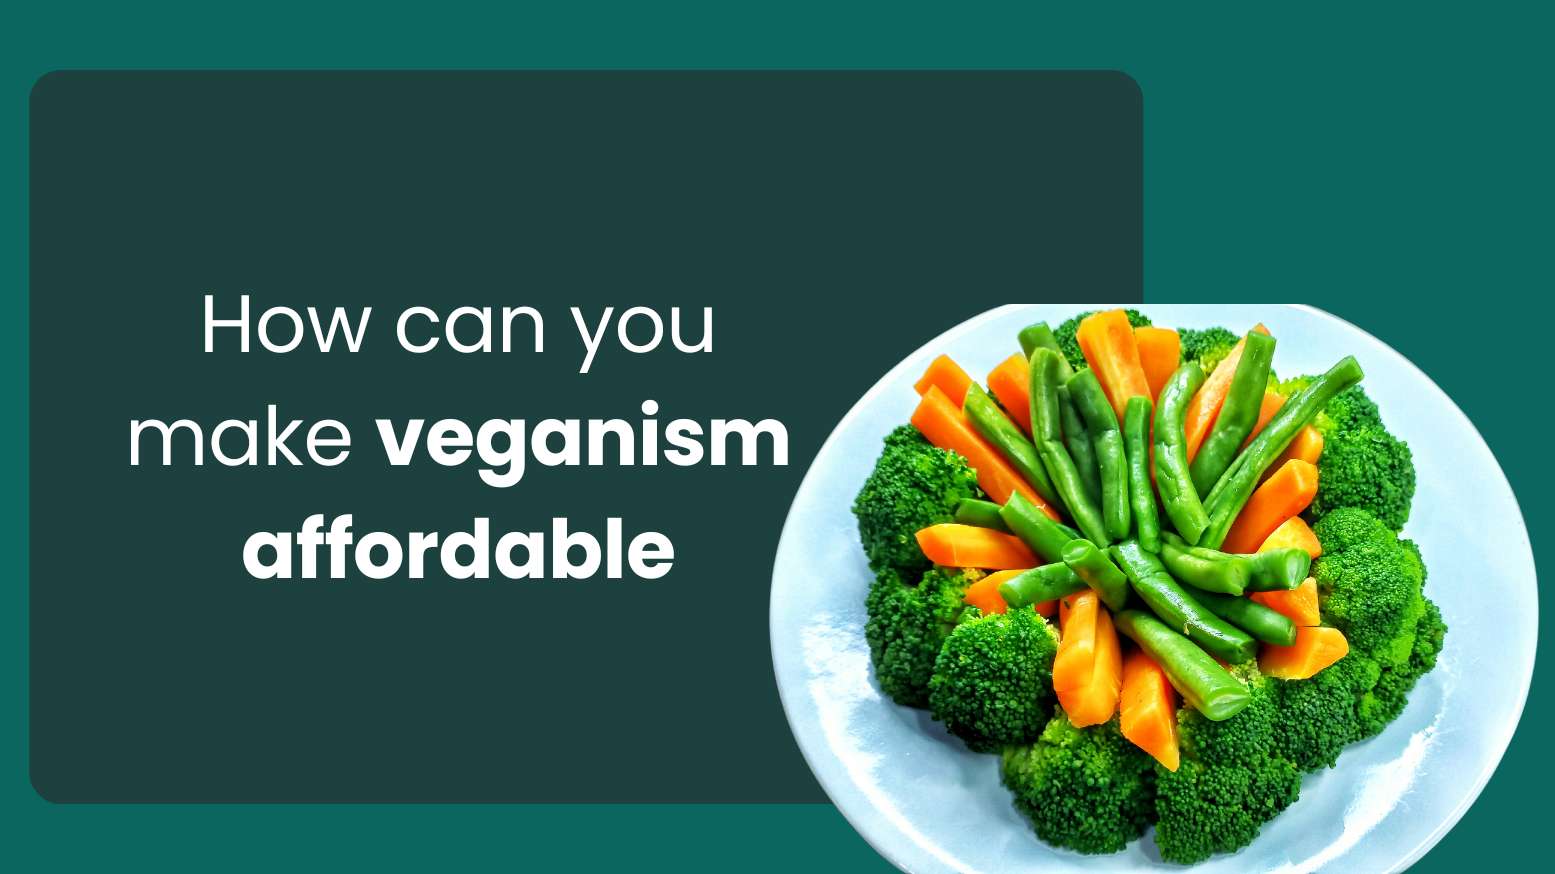 How can you make veganism affordable